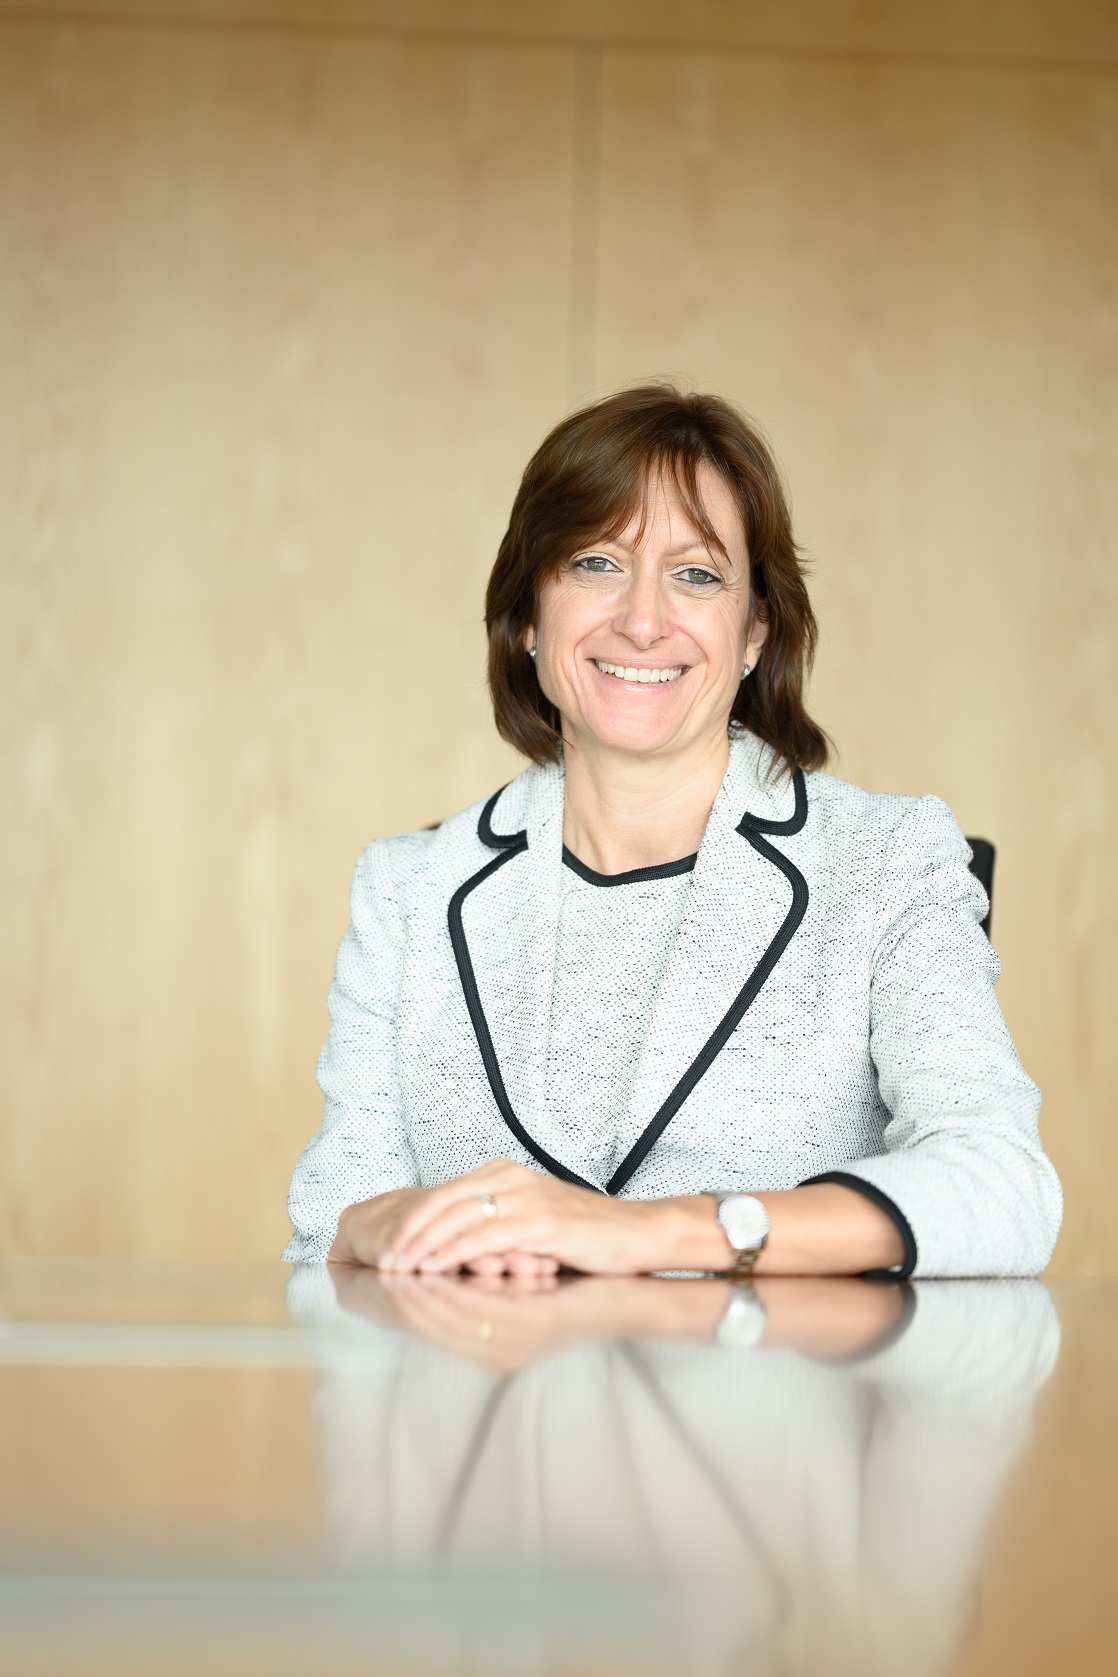 The Society of Motor Manufacturers and Traders (SMMT) has named Alison Jones as its 82nd president.